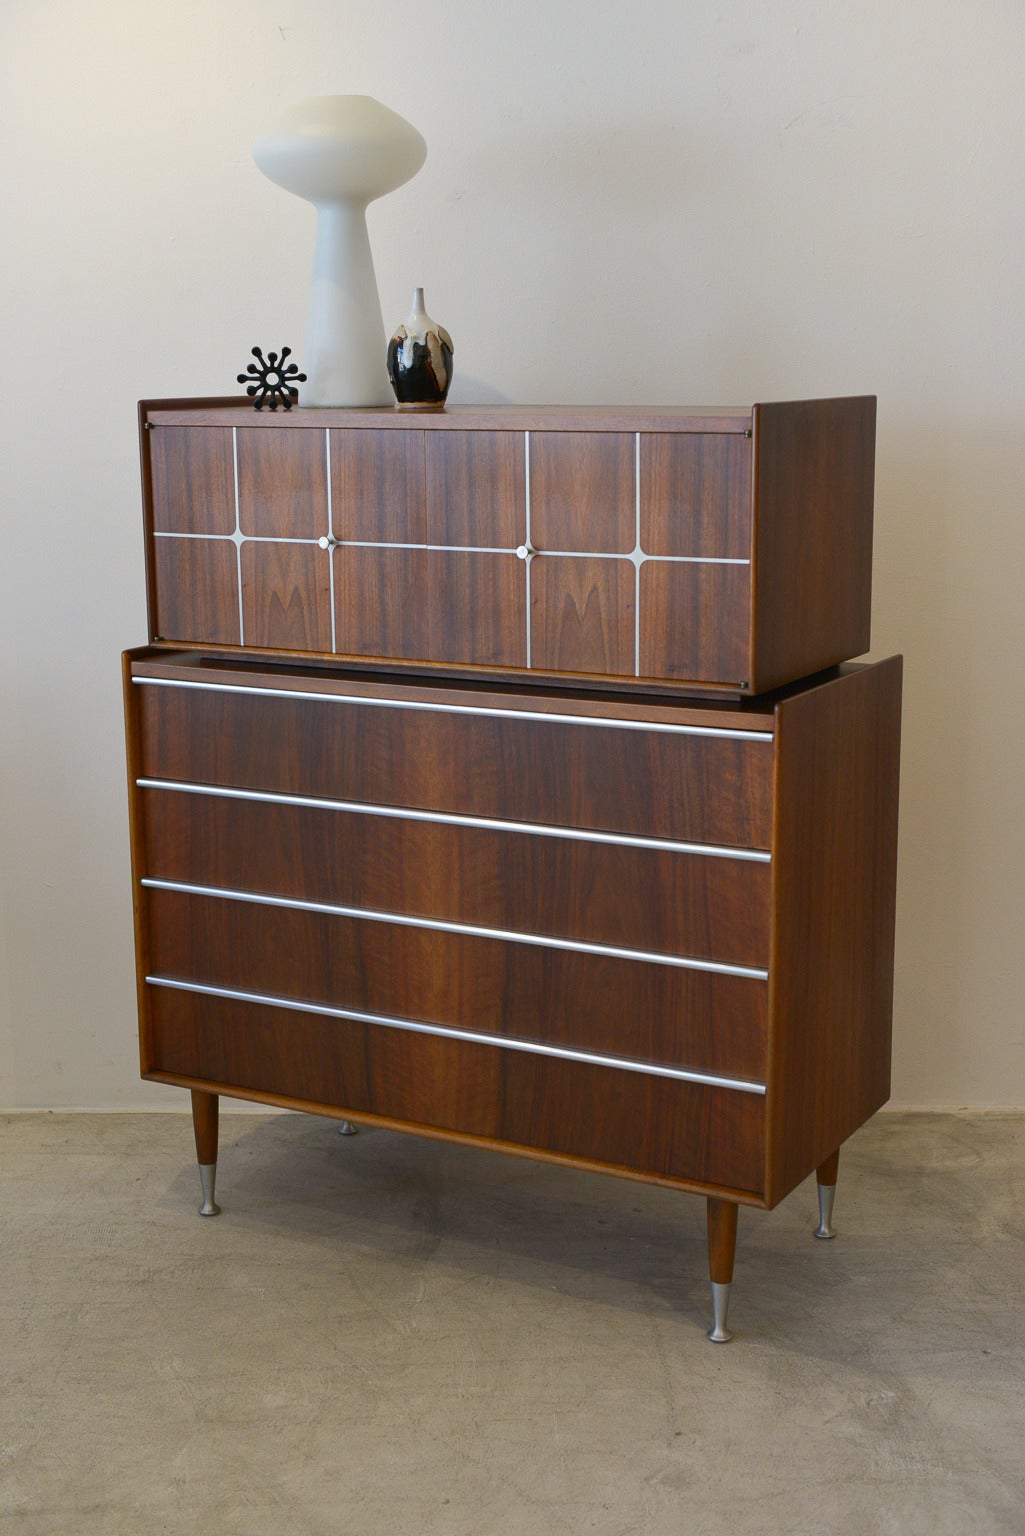 Beautiful and rare walnut with aluminum inlay, leg and drawer detail. Rare, extremely hard to find piece, this beautiful Edmund (Edmond) Spence highboy is made in Sweden, makers mark on the back. This beautiful piece is made of of two pieces, the